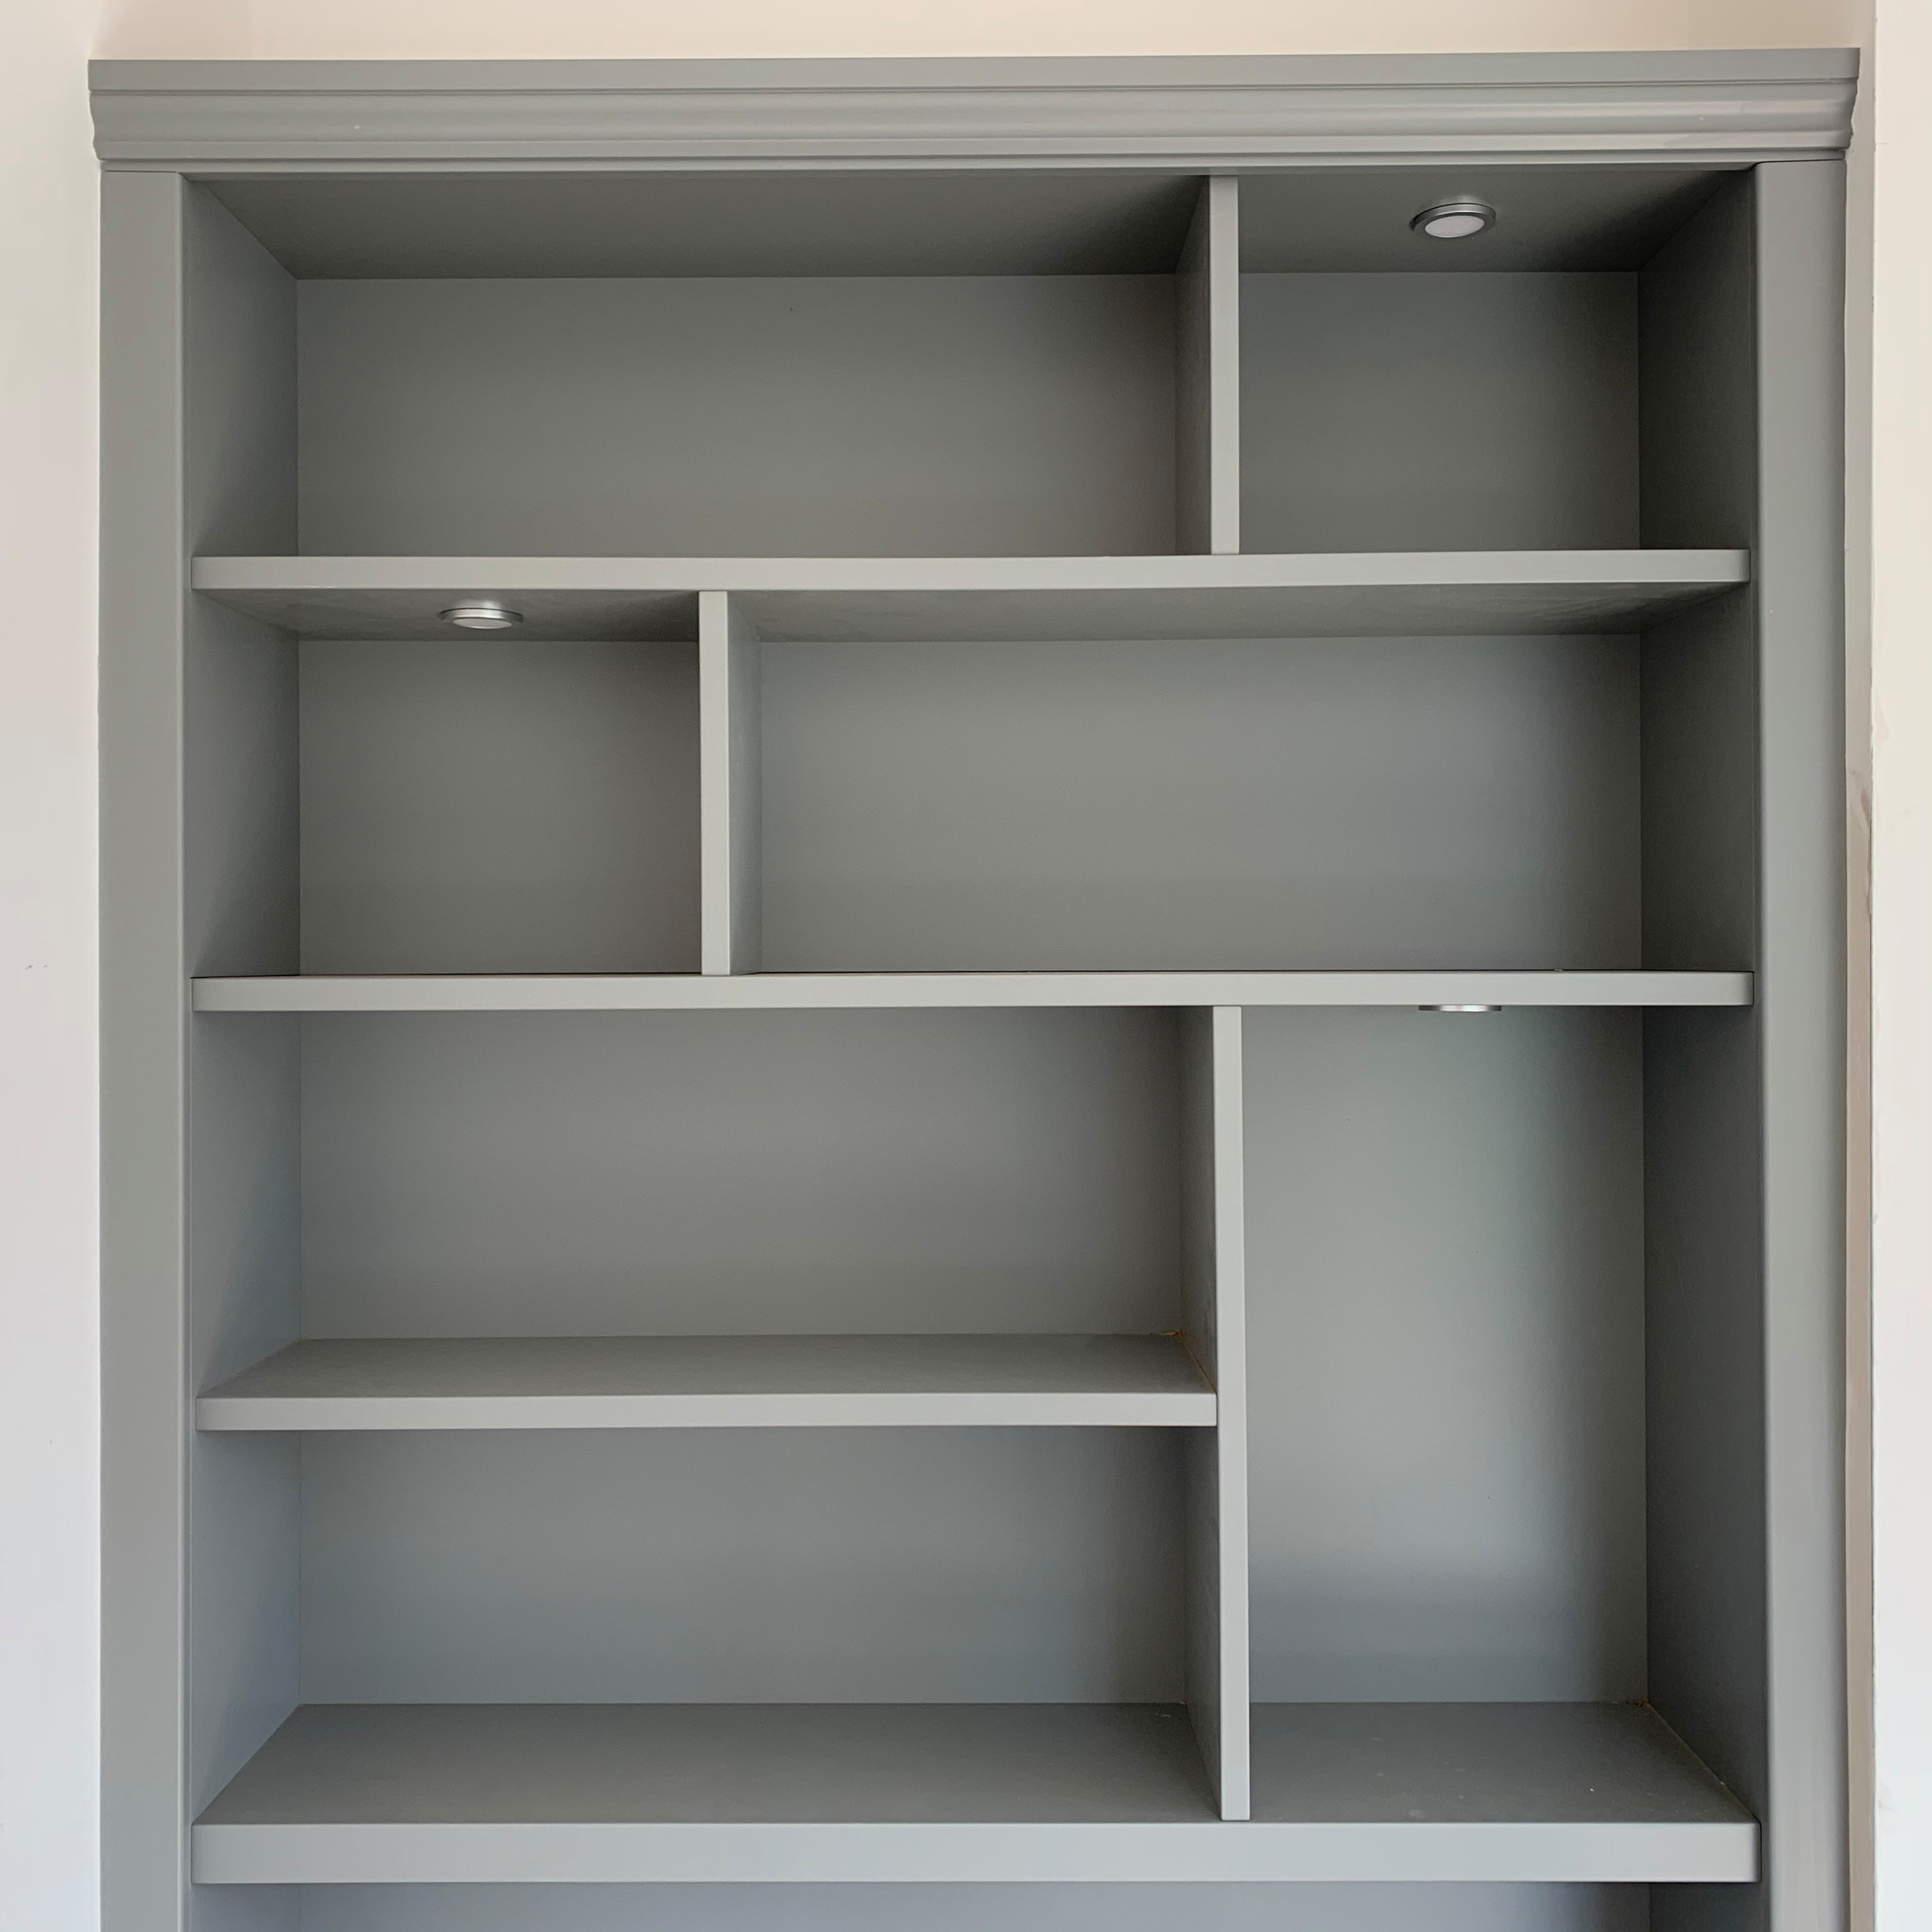 Classic grey bookcase shelving with lighting and dividers